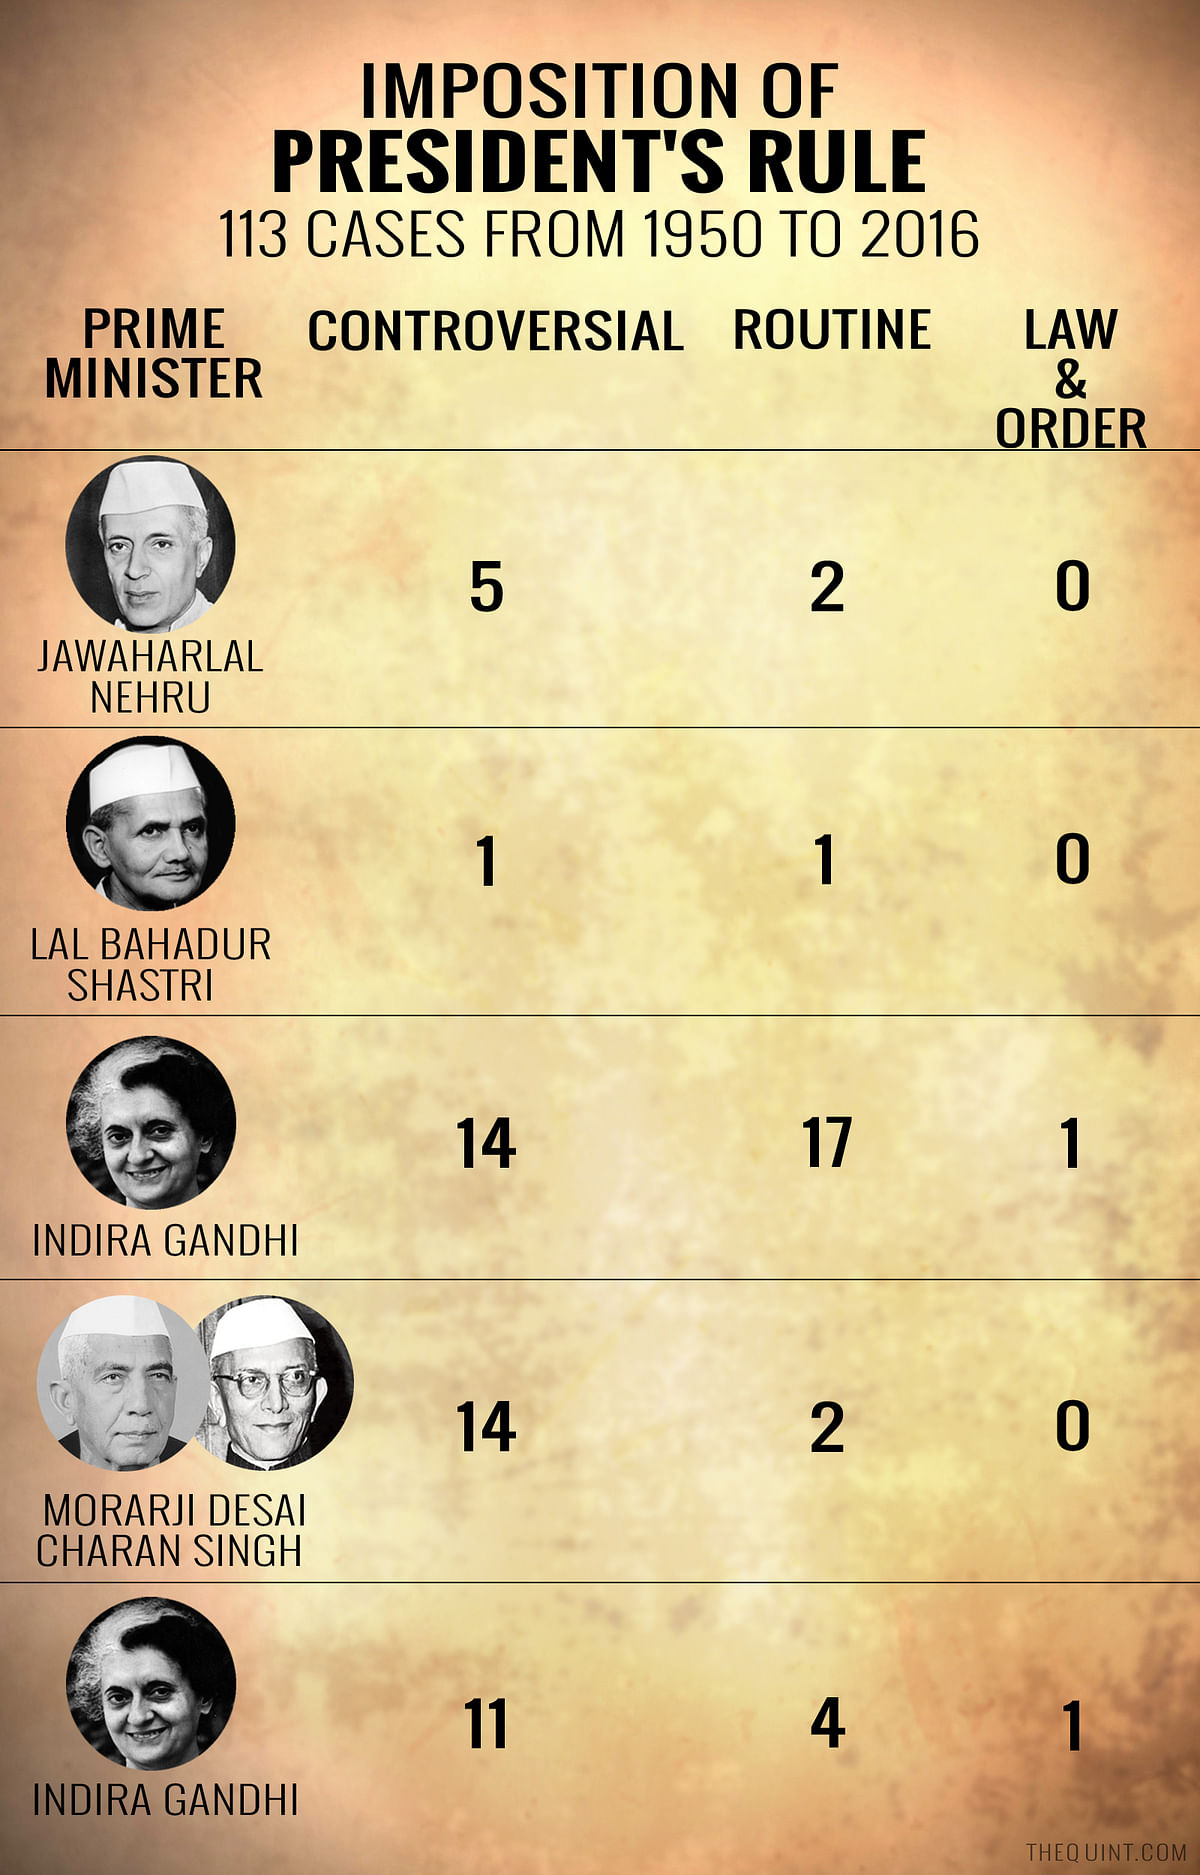 Amitabh Dubey traces the instances when  President’s rule was imposed by different prime ministers since 1950.